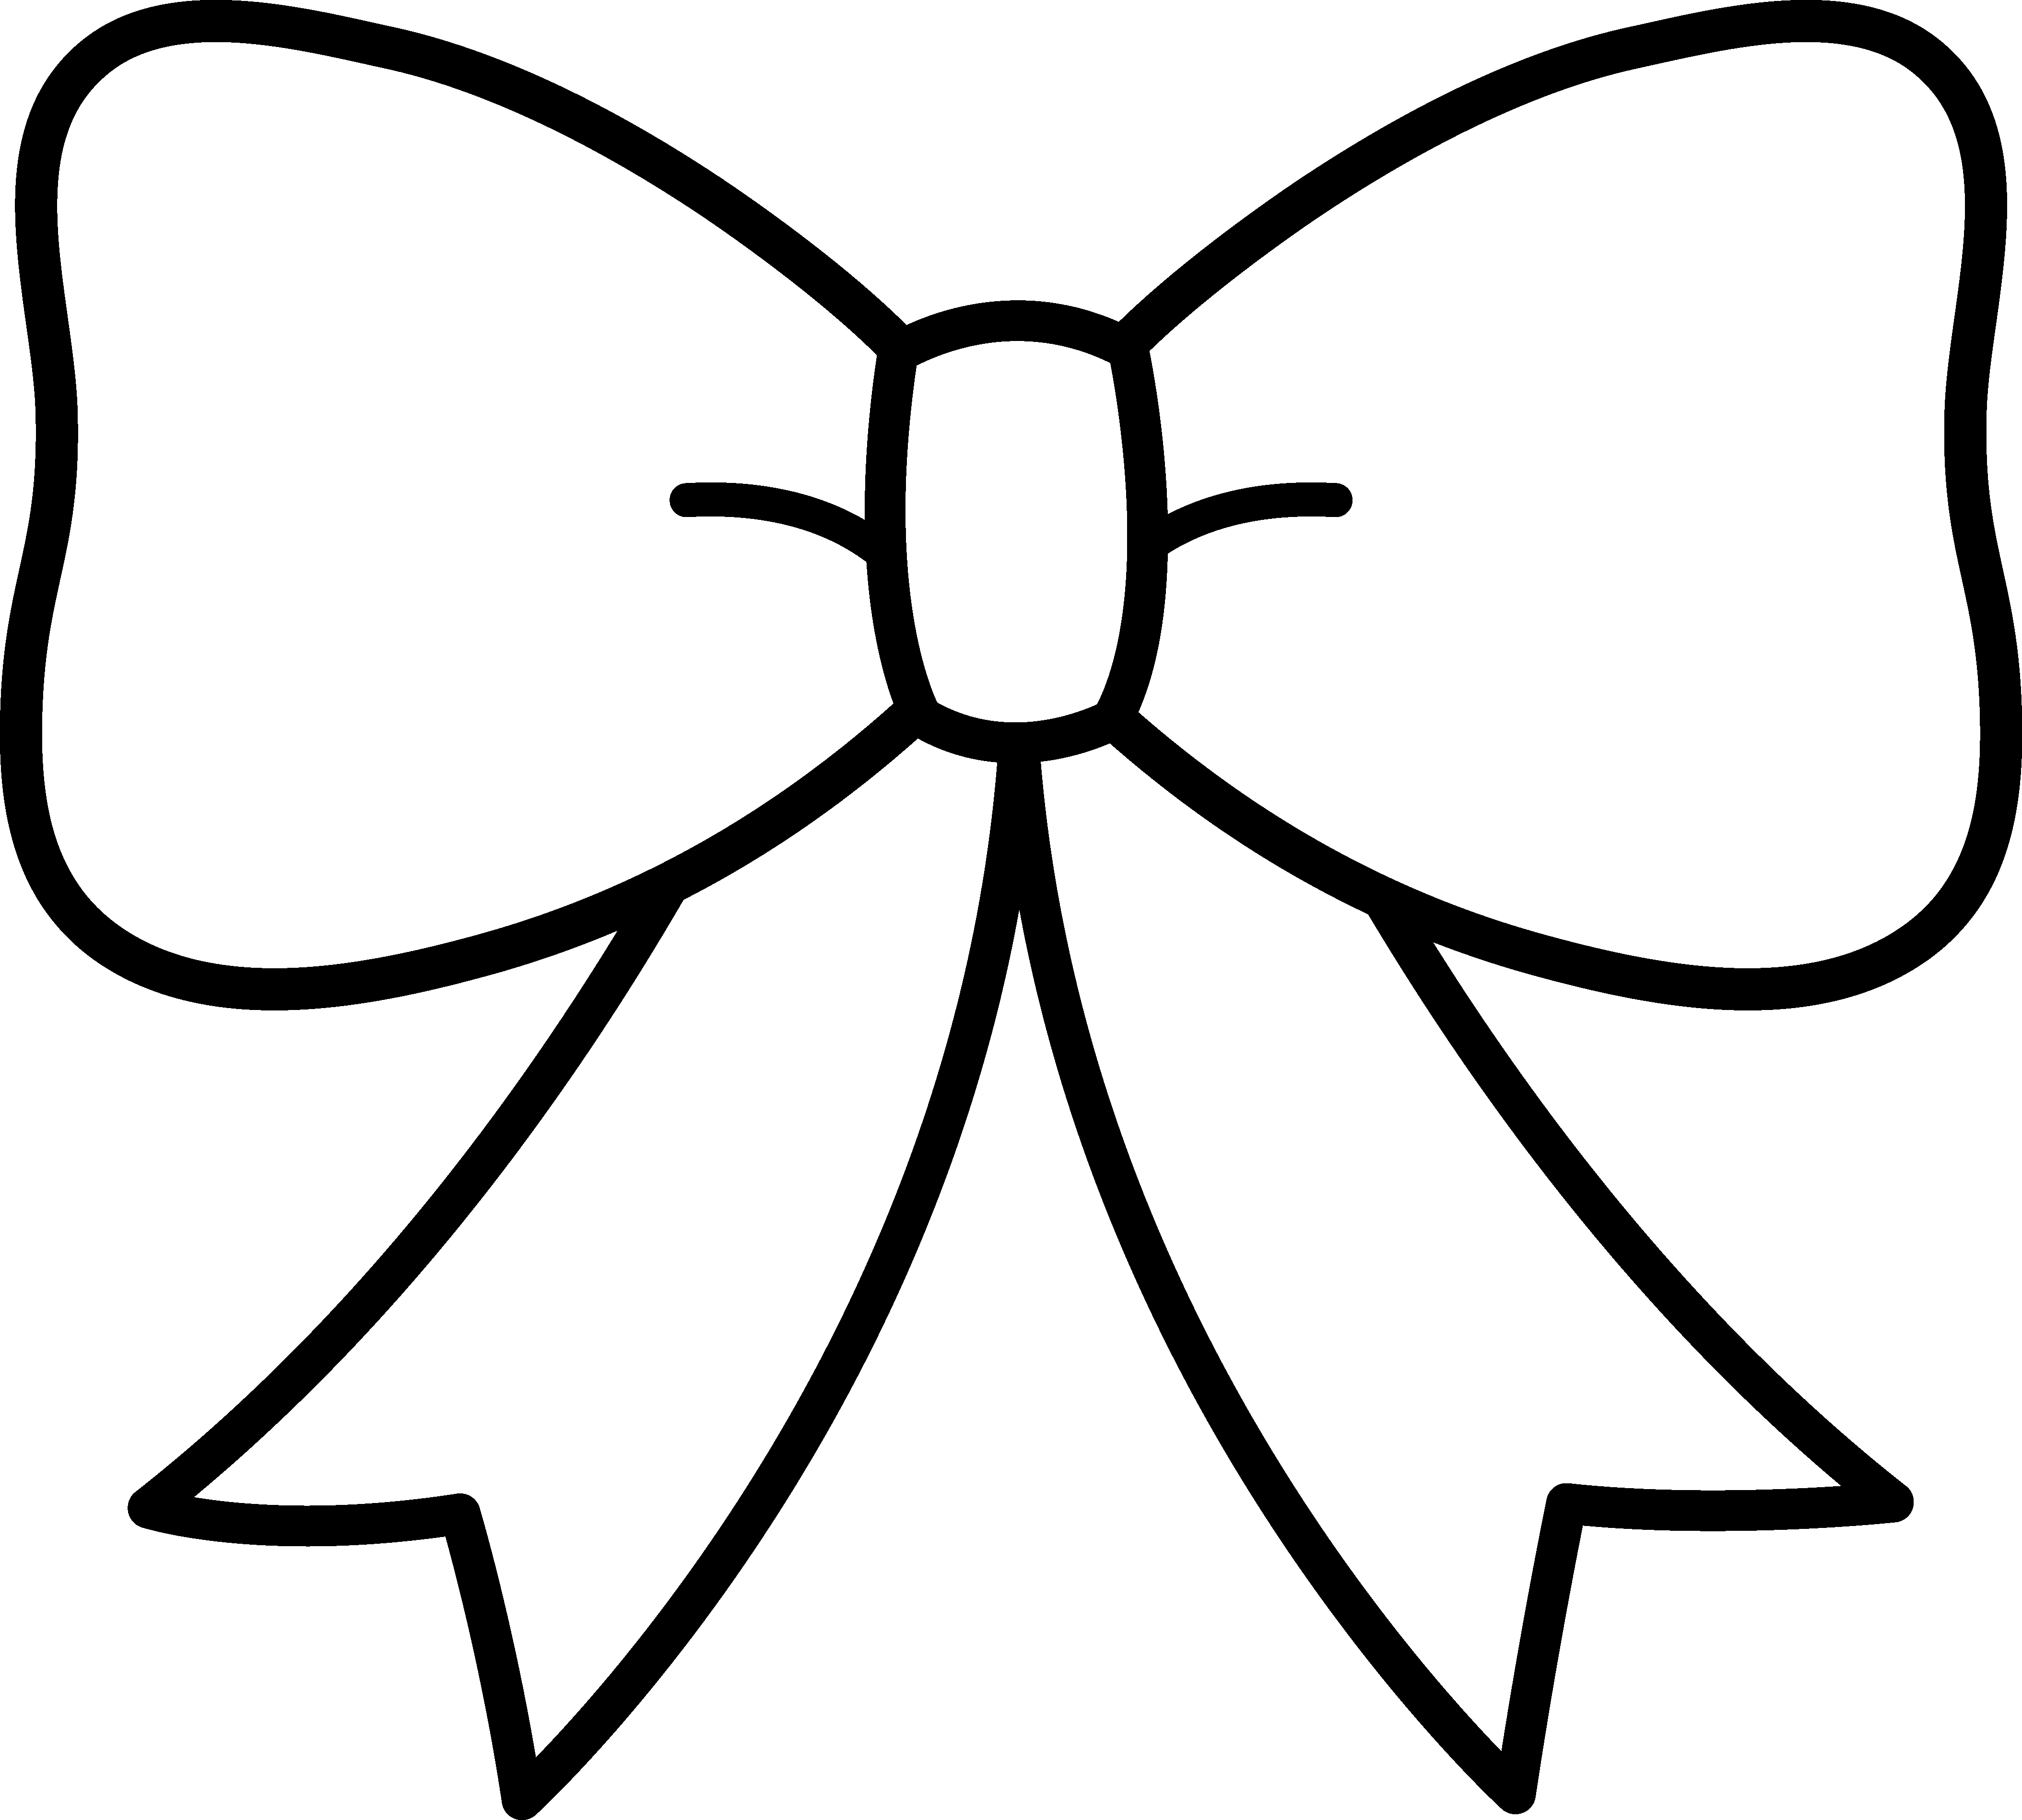 Bow black and white. Words clipart homecoming